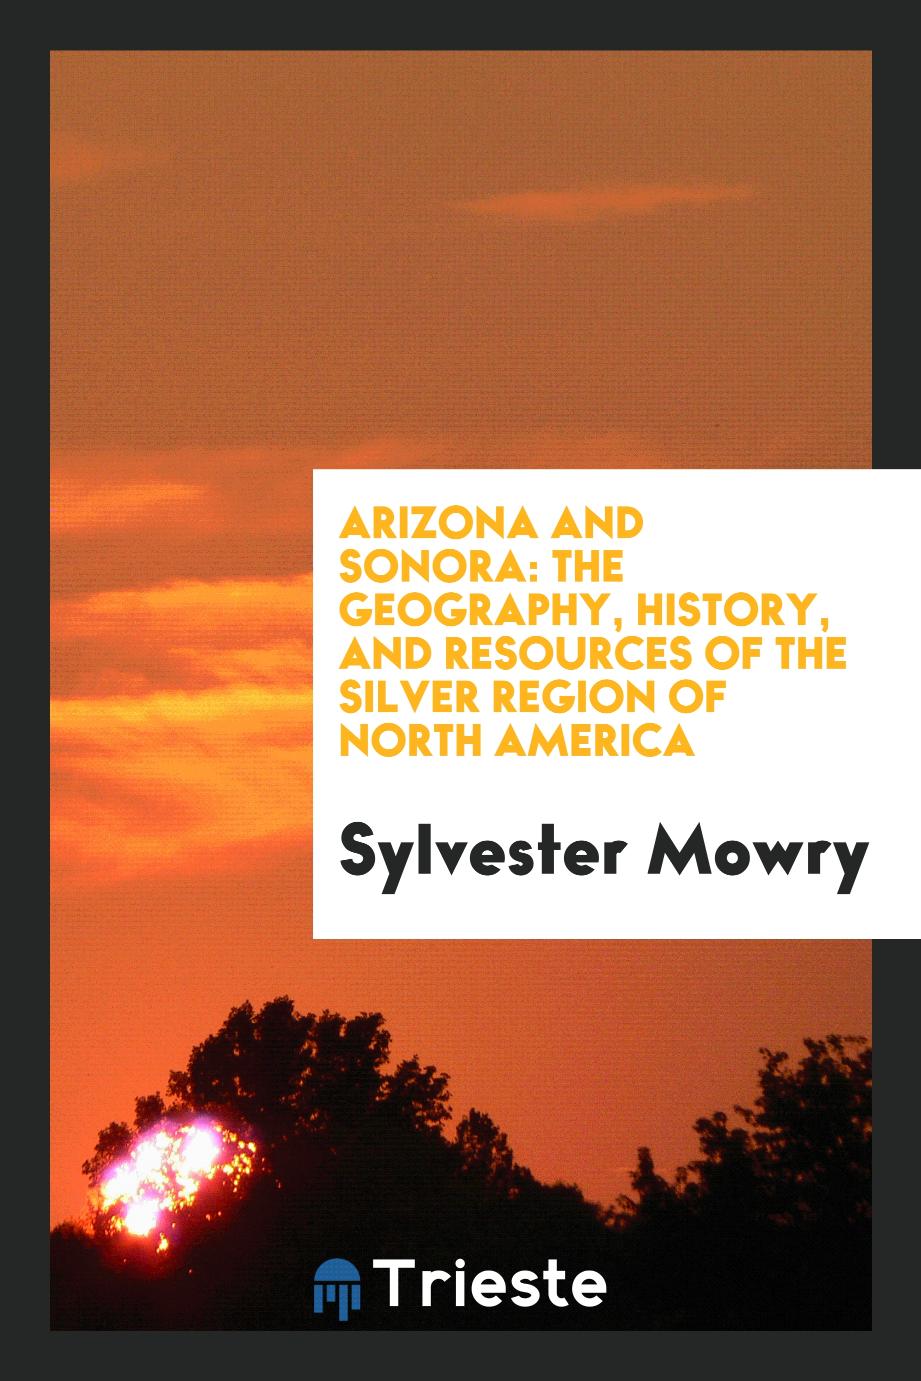 Arizona and Sonora: the geography, history, and resources of the silver region of North America